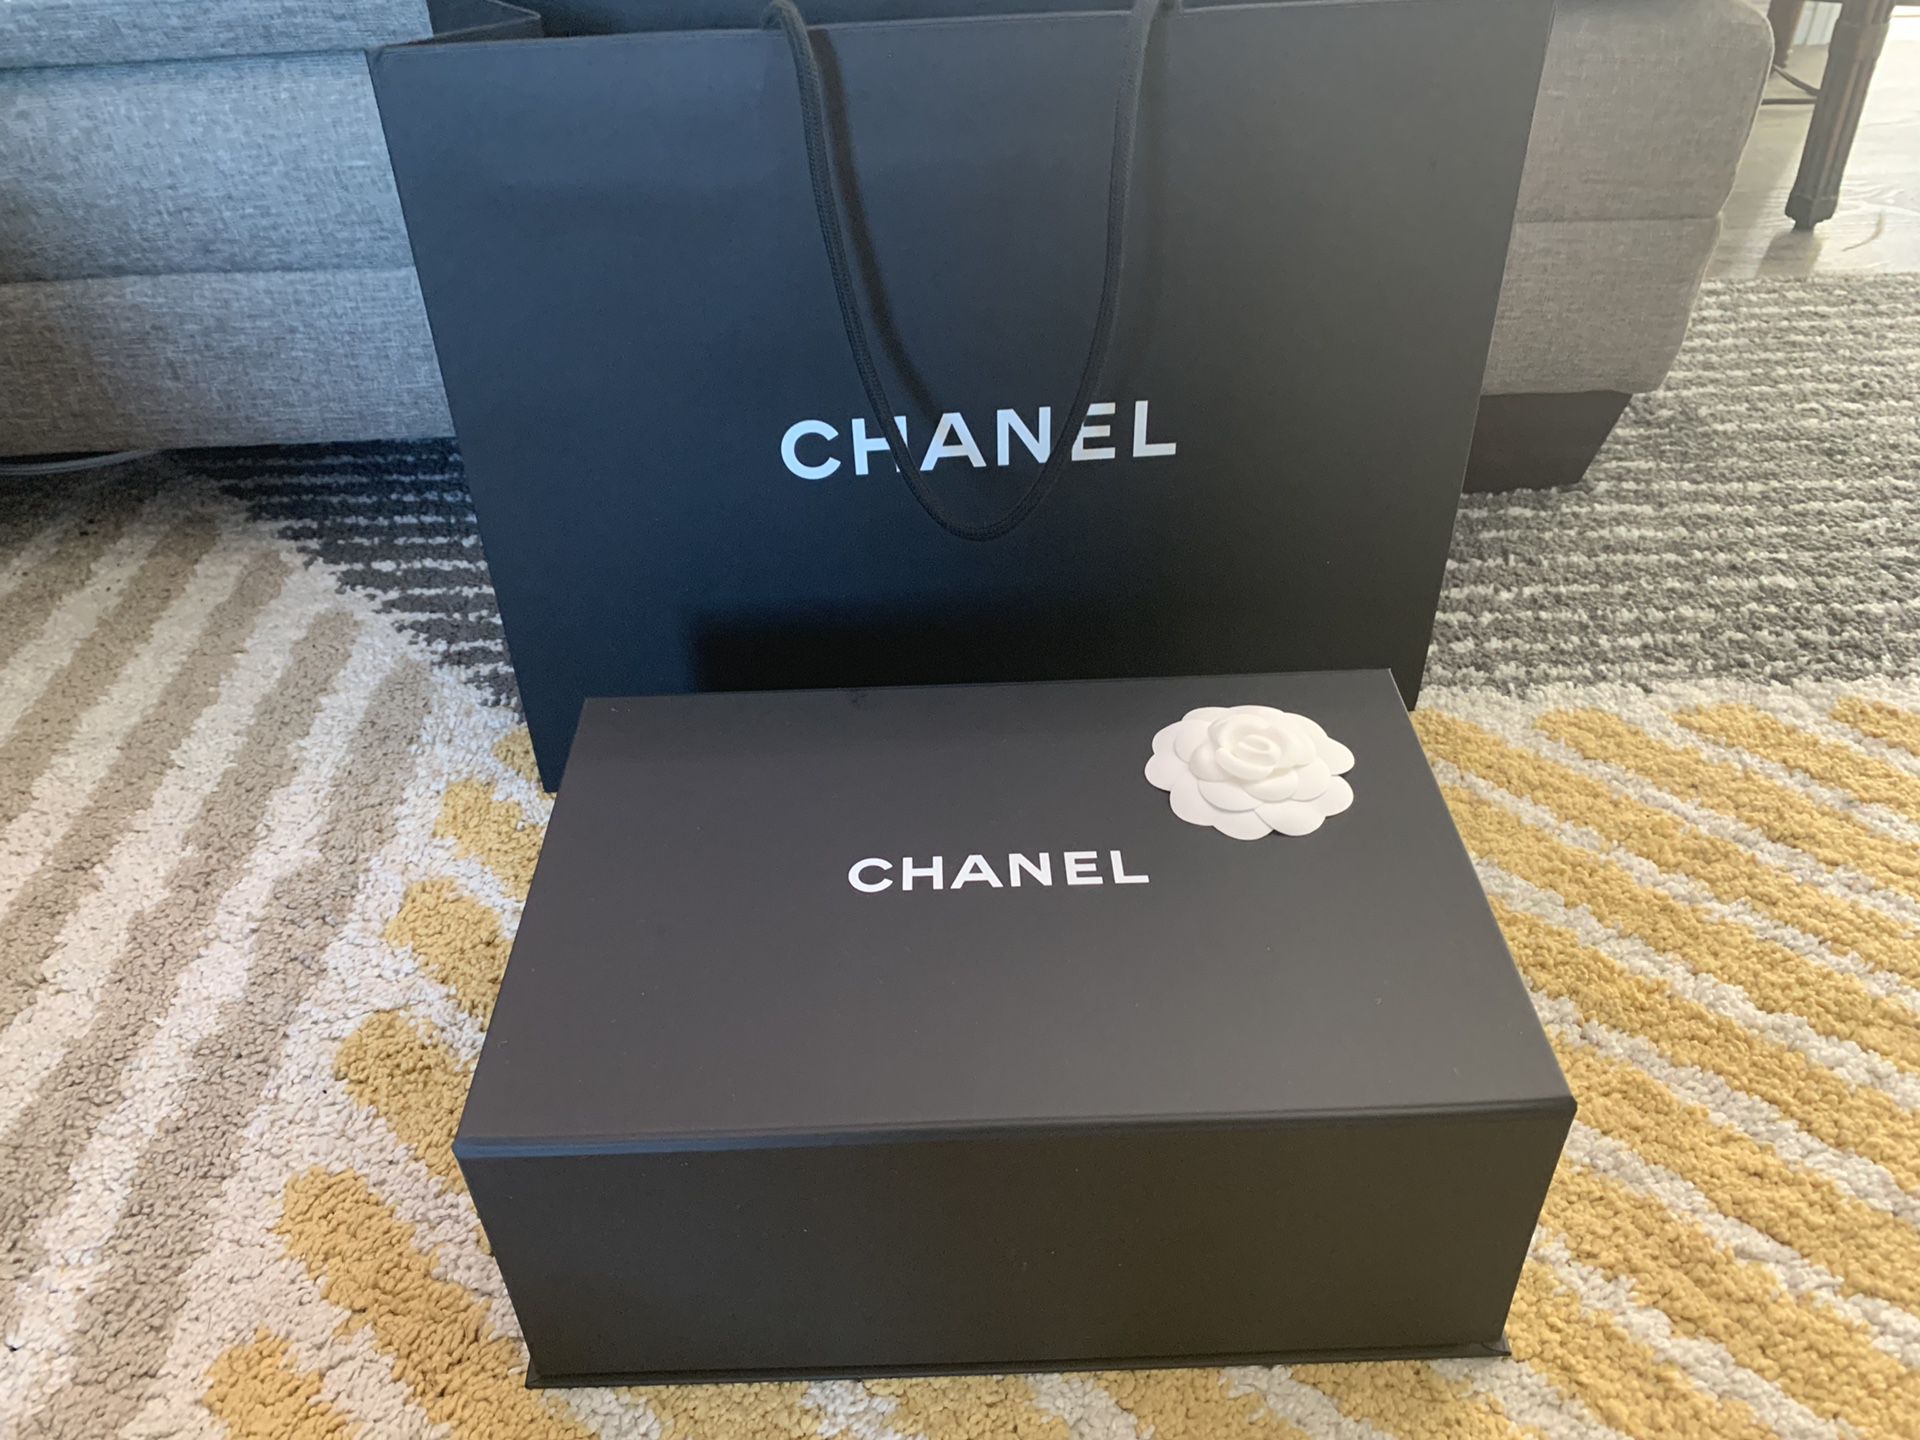 Chanel authentic box and shopping bag